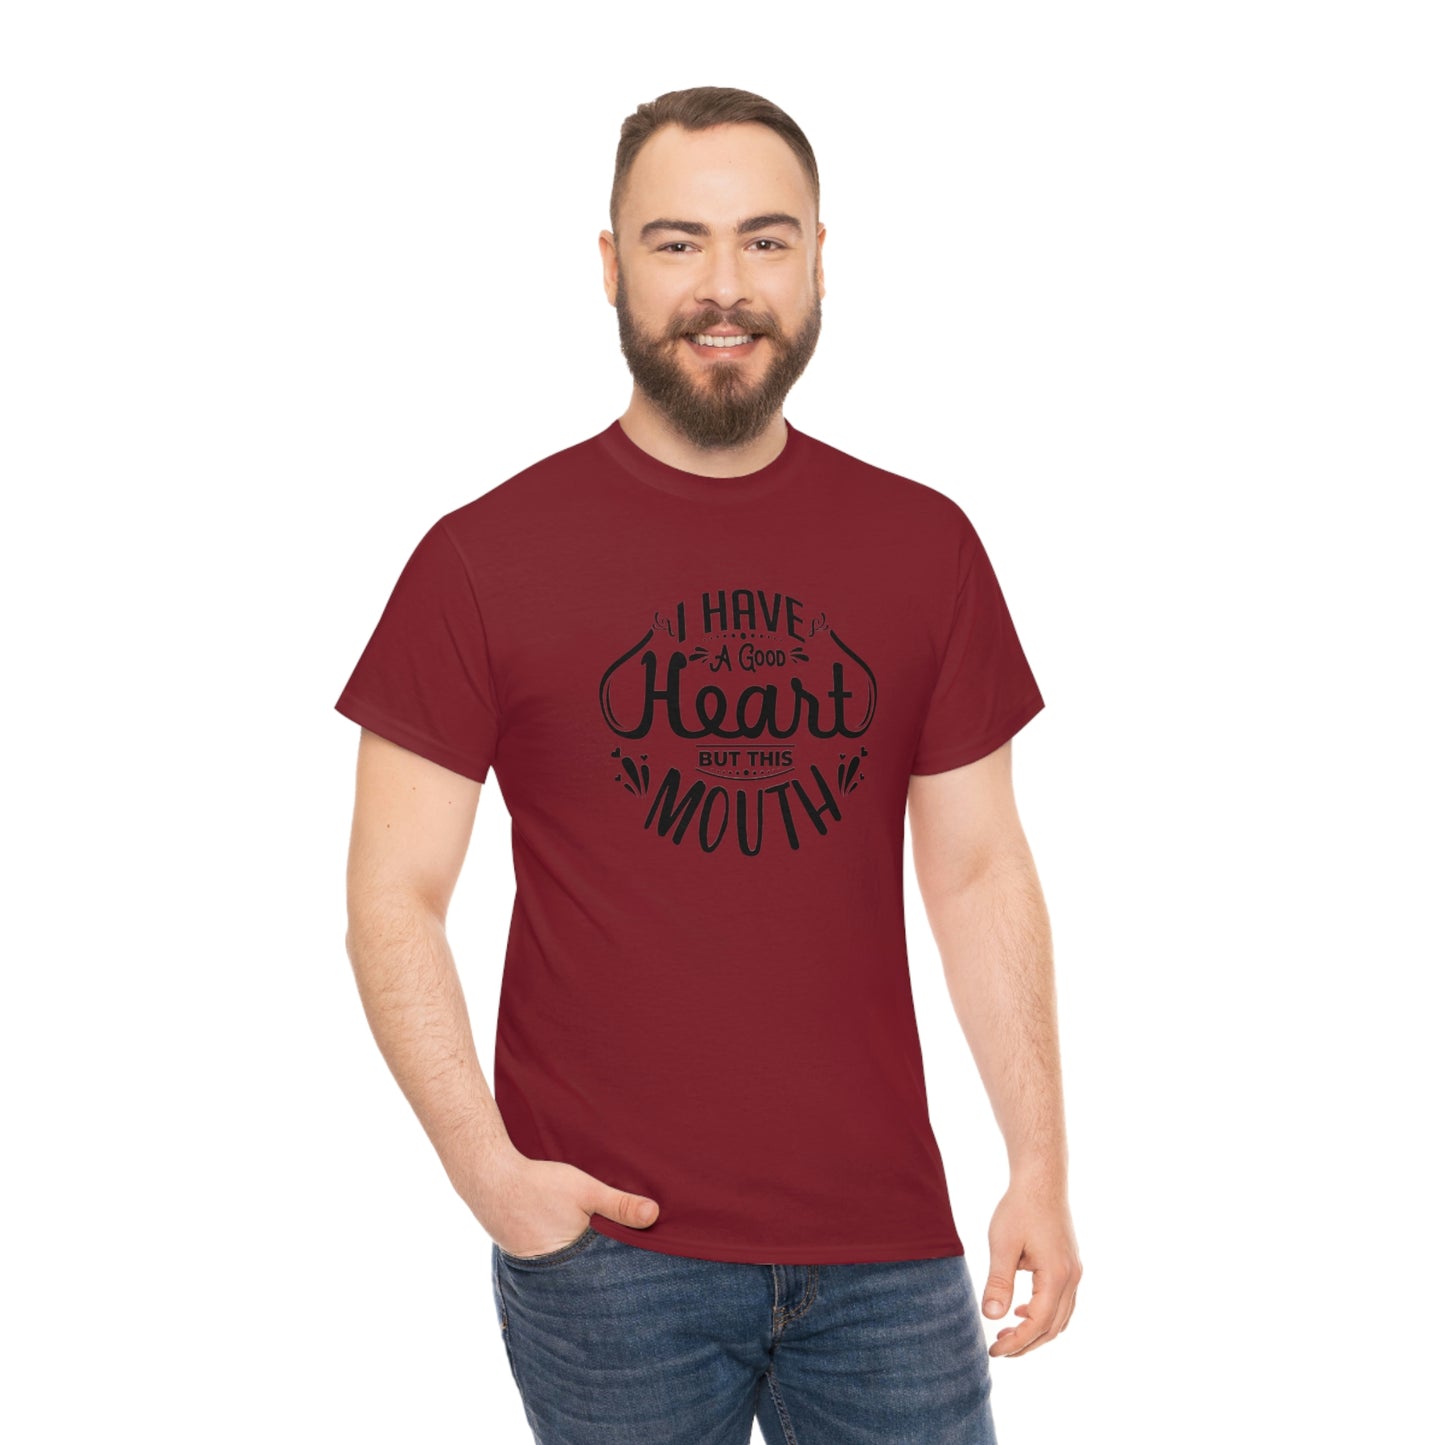 ‘I have a good heart. But this mouth’ Unisex Heavy Cotton Tee